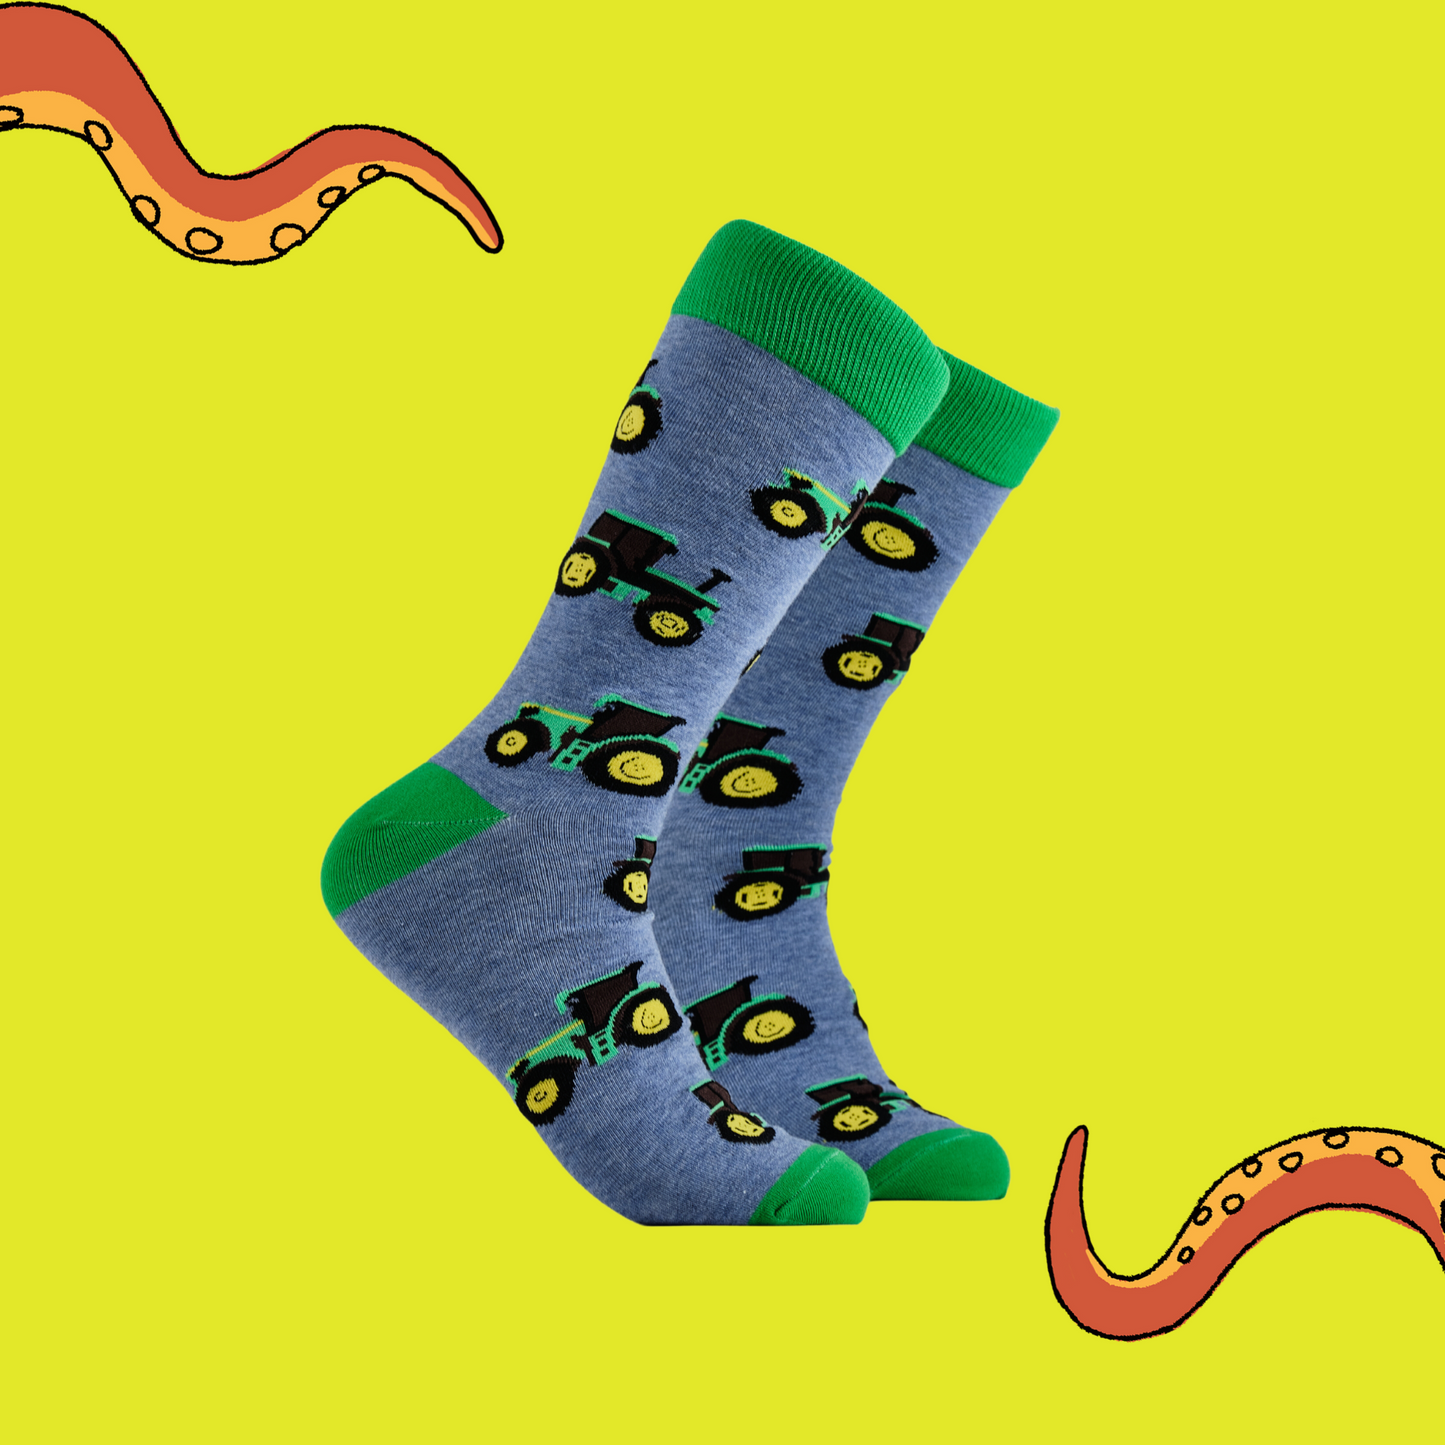 A pair of socks depicting green tractors. Blue legs, green cuff, heel and toe.